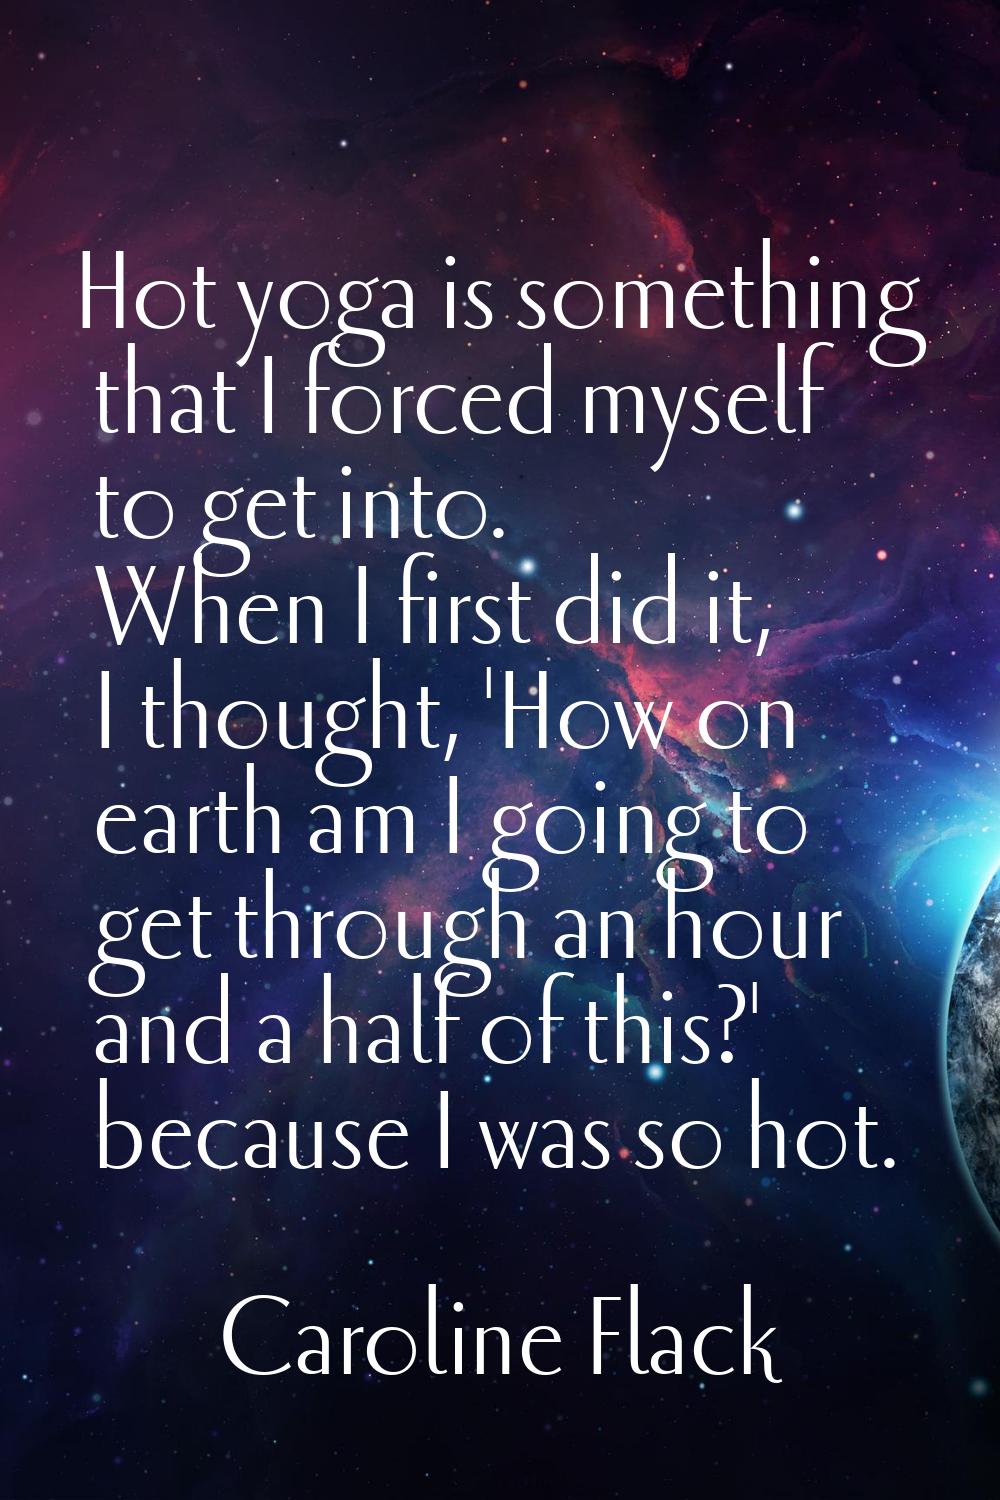 Hot yoga is something that I forced myself to get into. When I first did it, I thought, 'How on ear